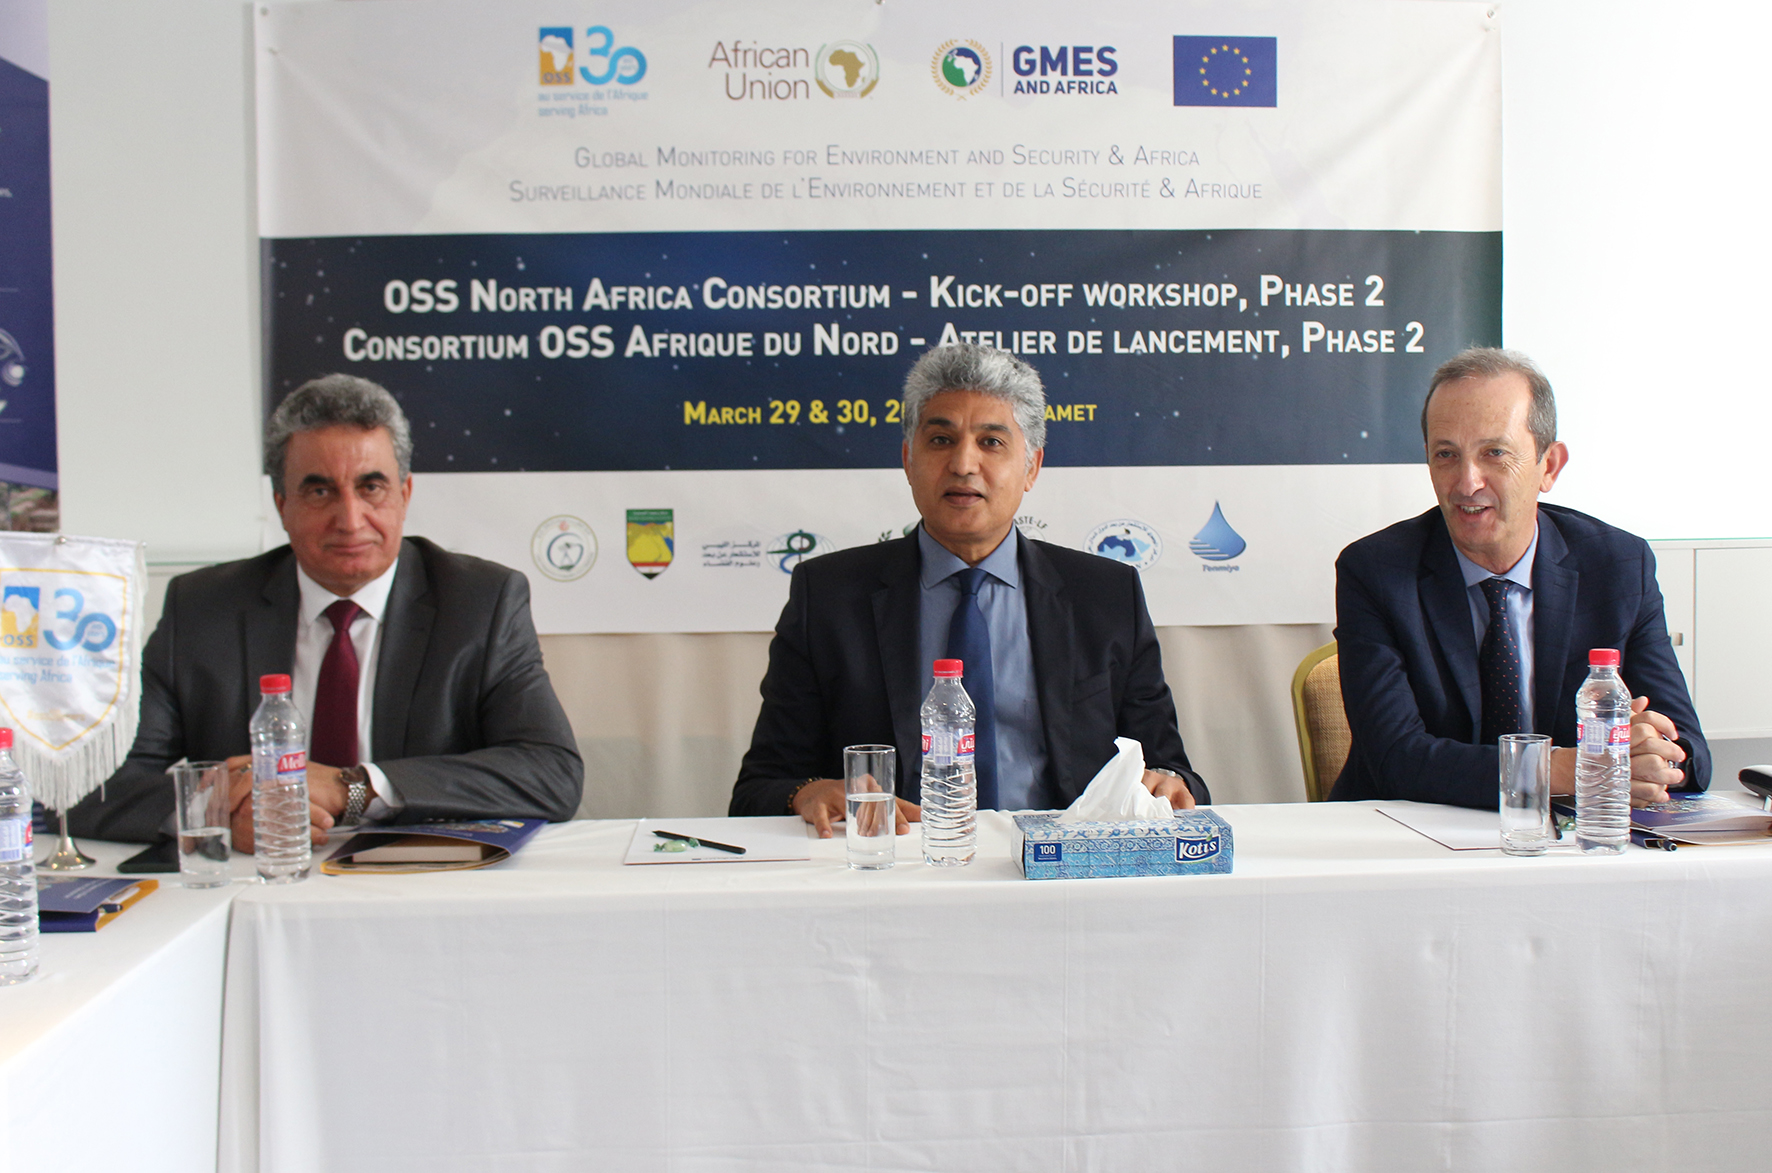  GMES&Africa project second phase - Start-up workshop, March 29 - 30, 2022 in Hammamet